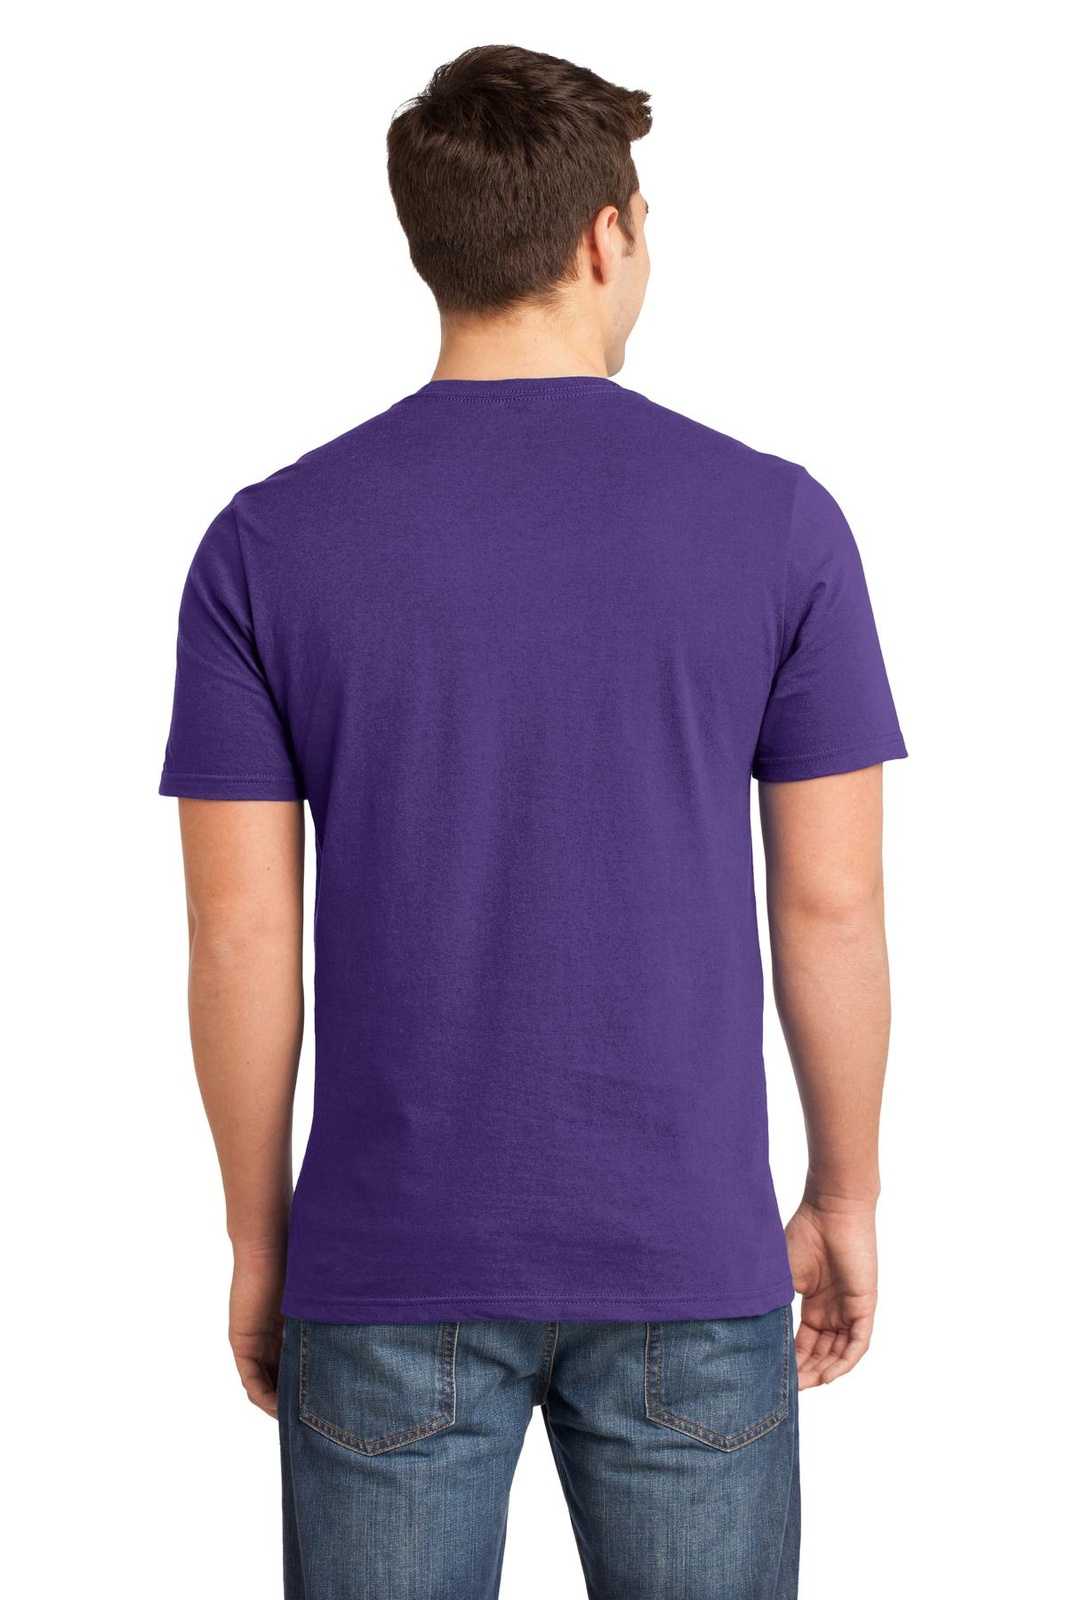 District DT6000 Very Important Tee - Purple - HIT a Double - 1